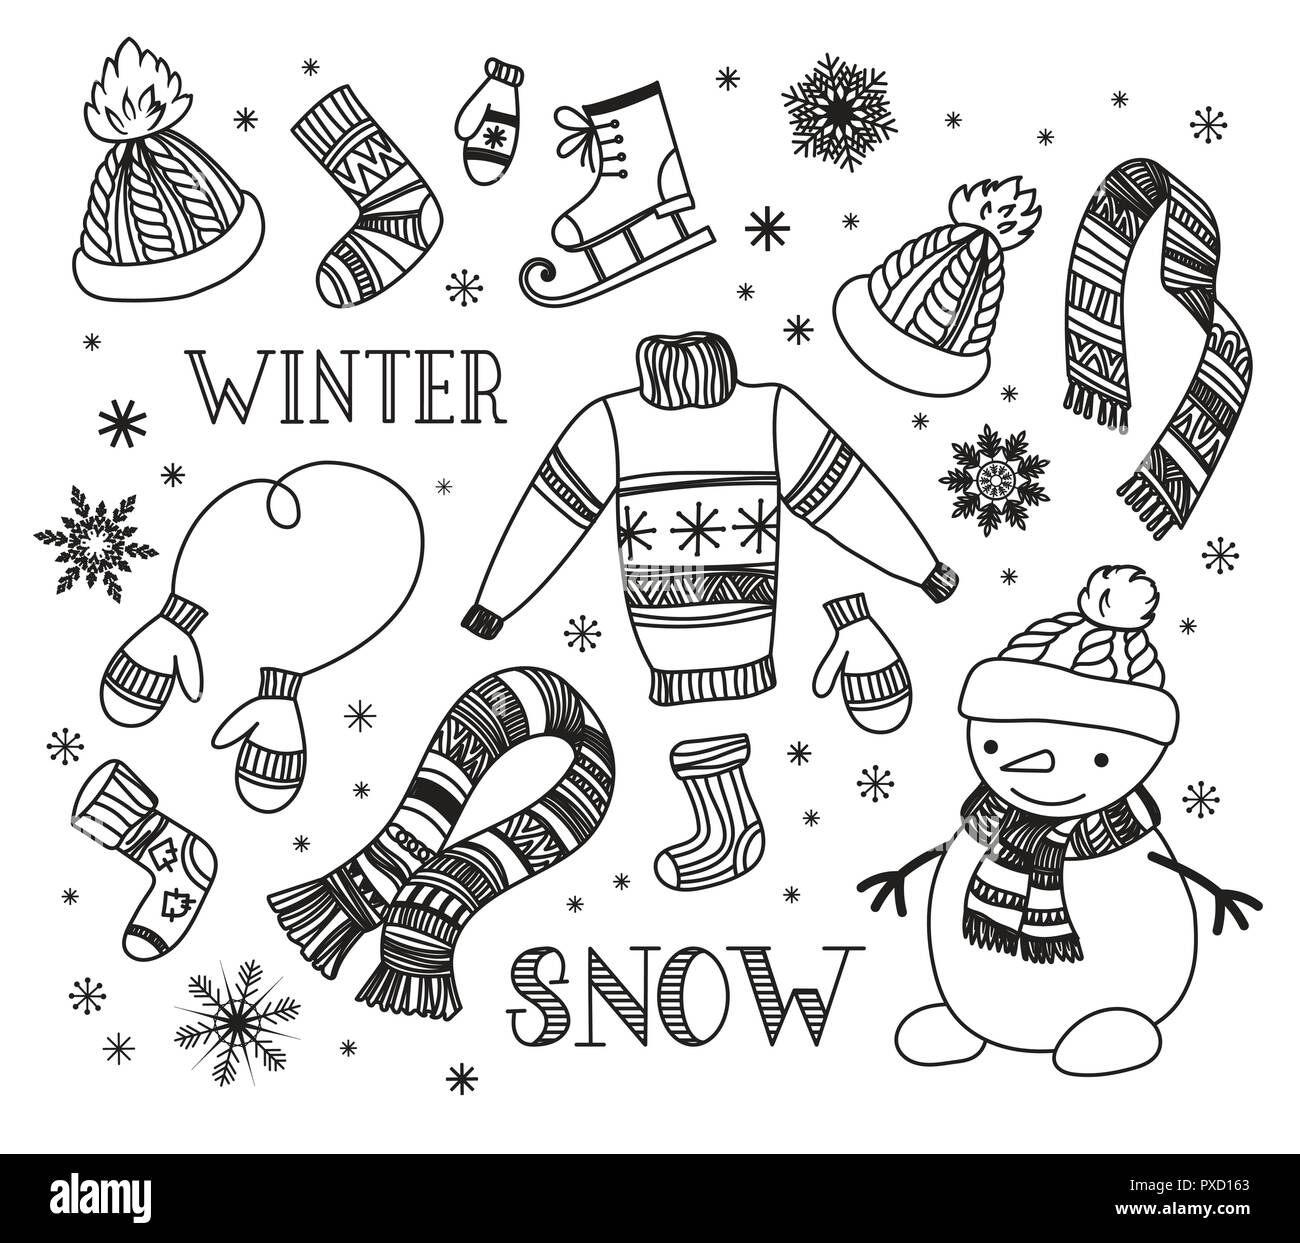 Hand drawn winter doodle set. Design elements collection: knitted caps, scarf, sweater, mittens, socks, ice skates and snowman Vector illustration isolated on white. Design elements collection. Stock Vector